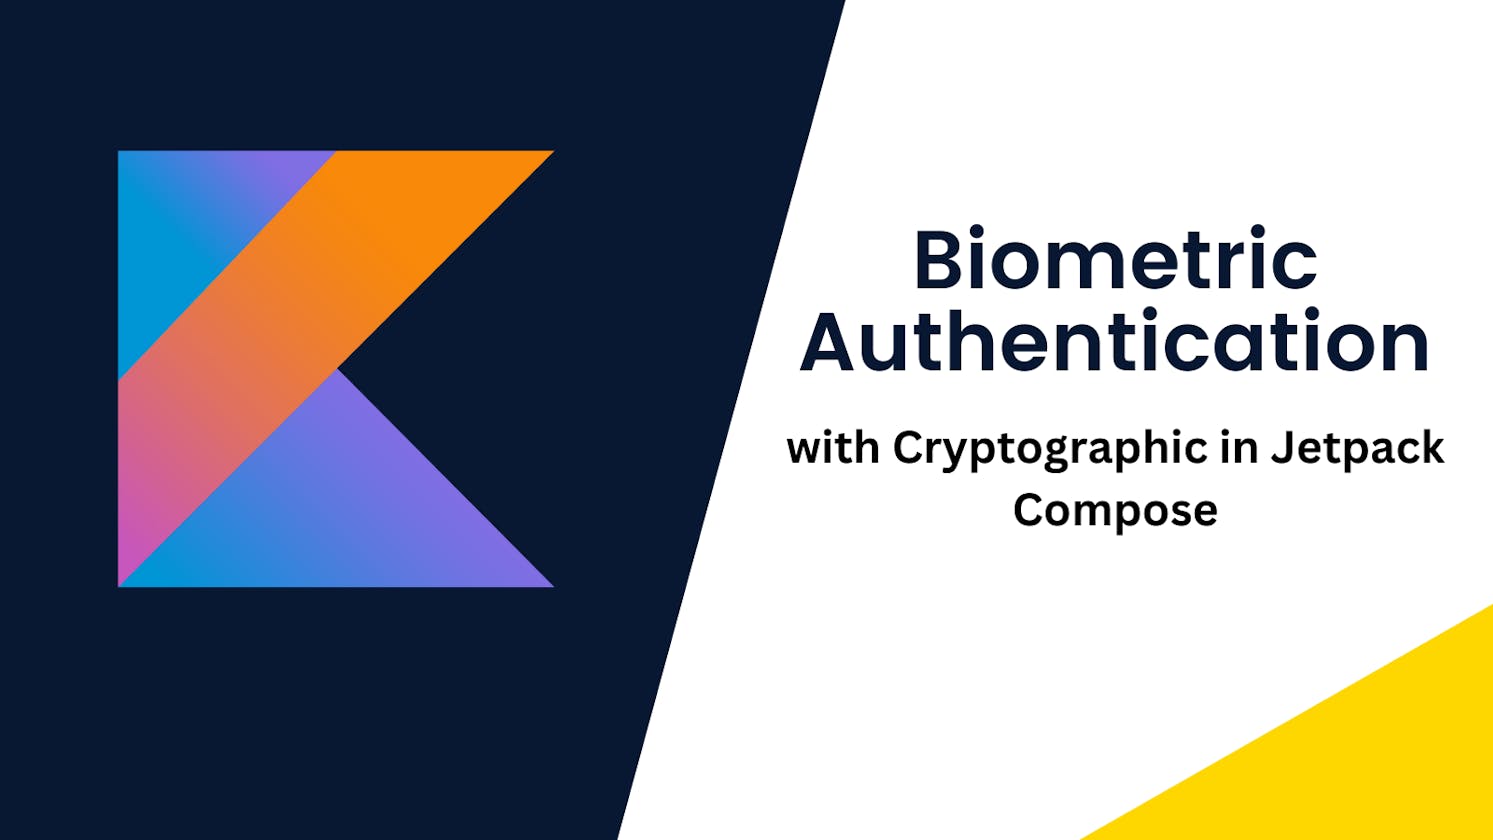 Biometric Authentication with Cryptographic in Jetpack Compose